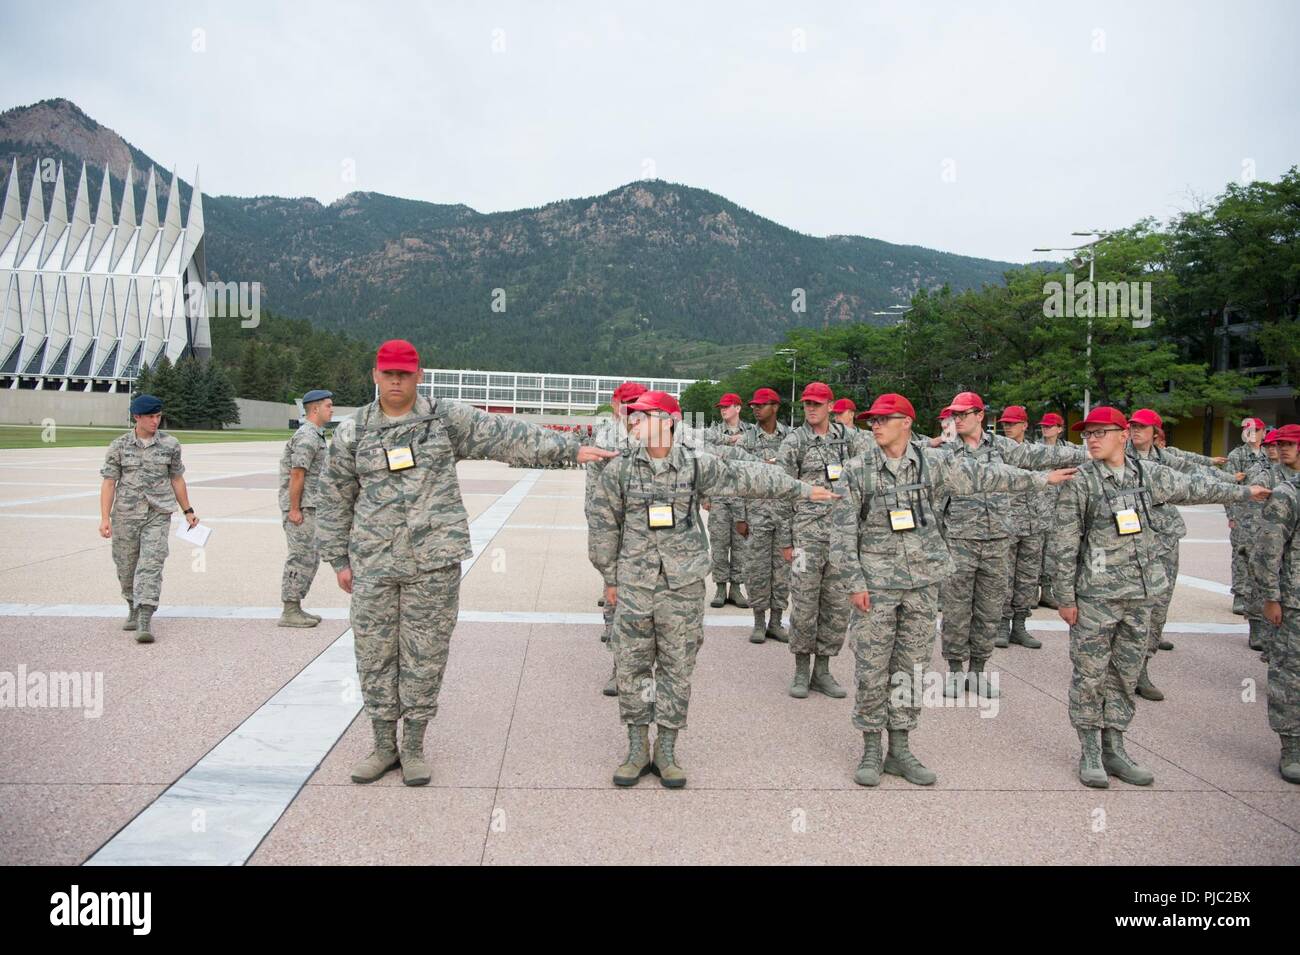 U.S. Air Force Academy -- Cadets 1st Class William Botterbusch and Liam Sax perform open ranks inspection on basic cadets, Jul. 20, here. Stock Photo